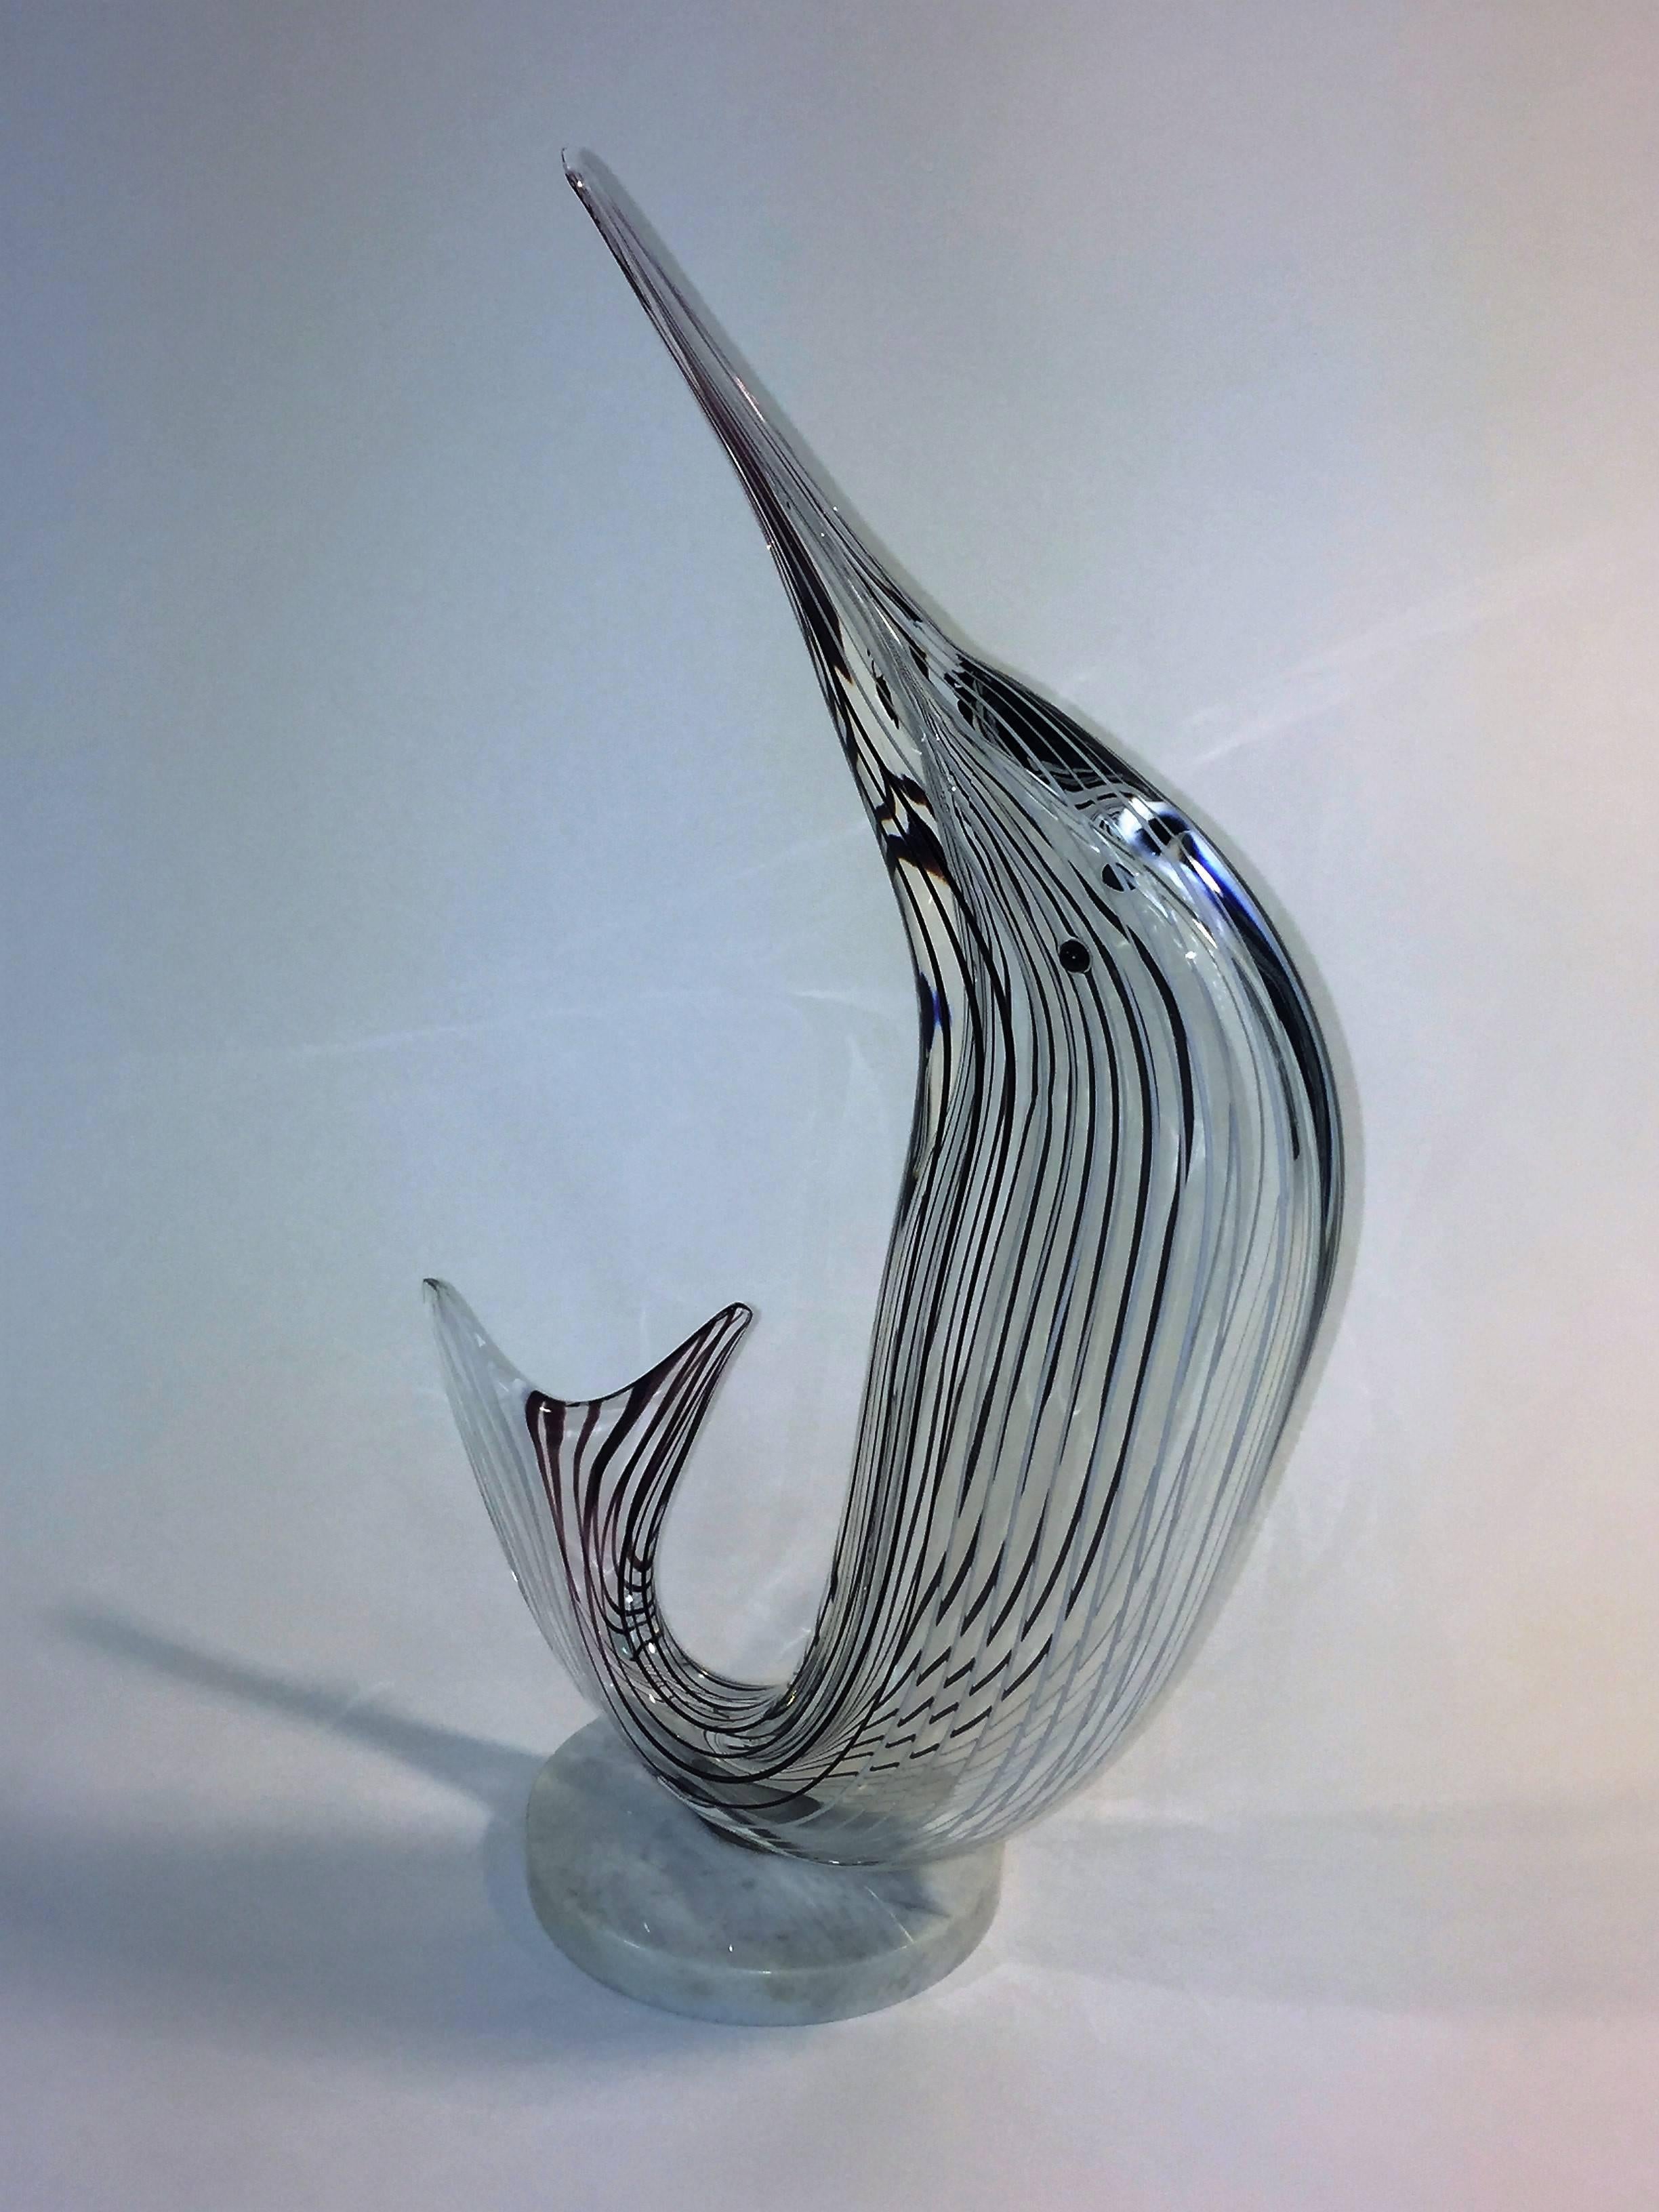 Modernist 1970s Italian handblown Murano glass sailfish sculpture mounted on round white marble base. Nicely blown in a swirl like form this charismatic sailfish has a black eye and lots of personality. The round white marble base is 6